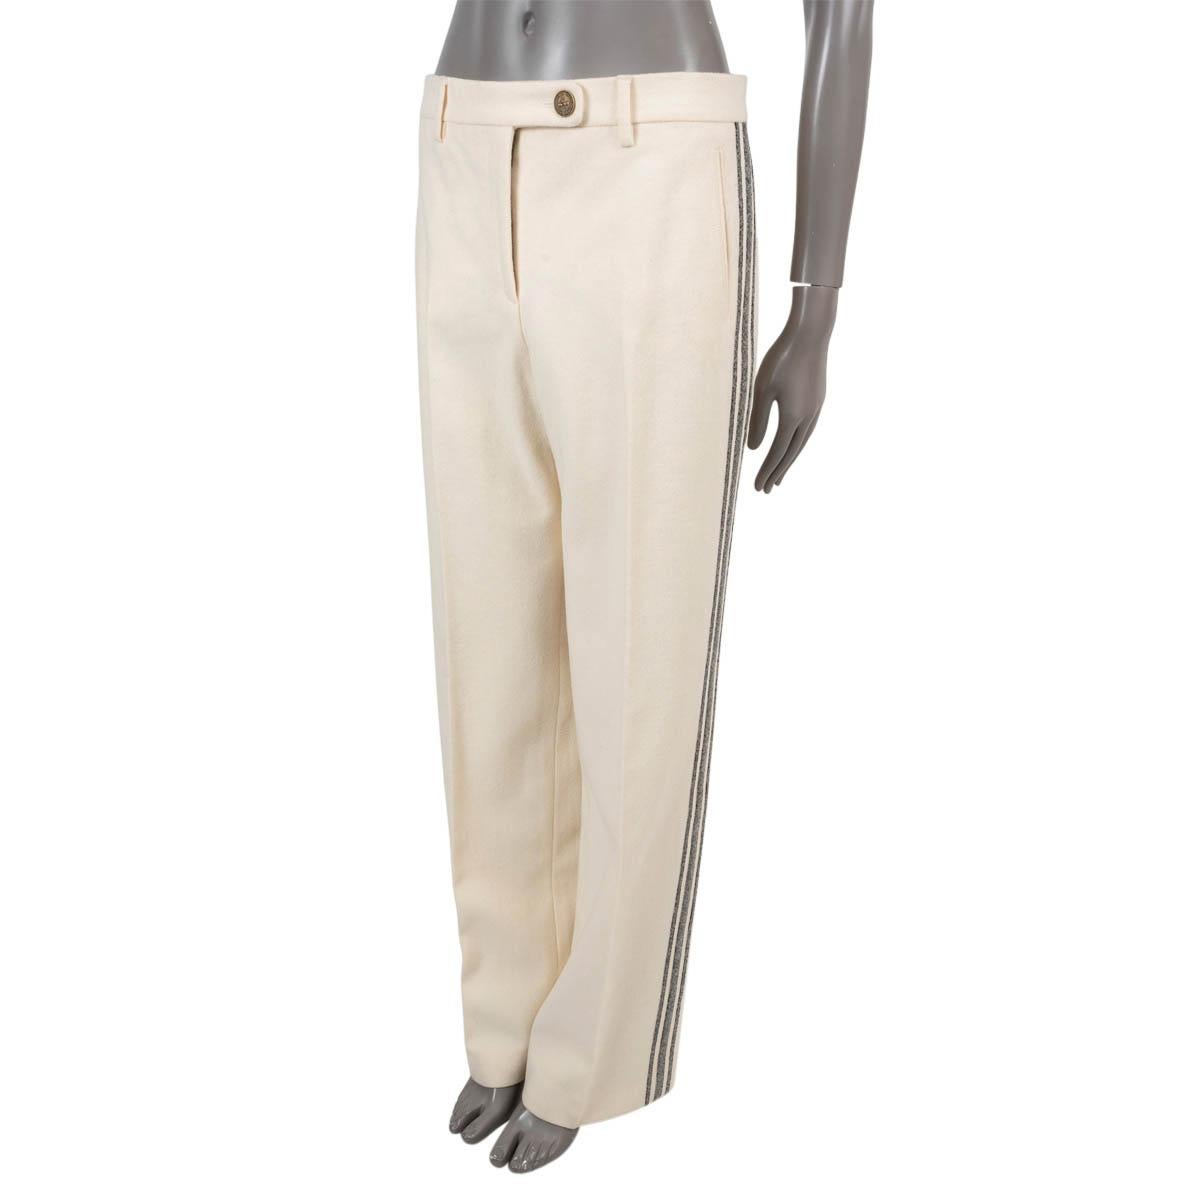 100% authentic Chanel pants in off-white wool (80%) and alpaca (20%). Feature side stripes in grey, a high-rise, wide legs, two slit pockets and a pocket on the back. Closes with a button and concealed zipper on the front. Lined in silk (100%). Have